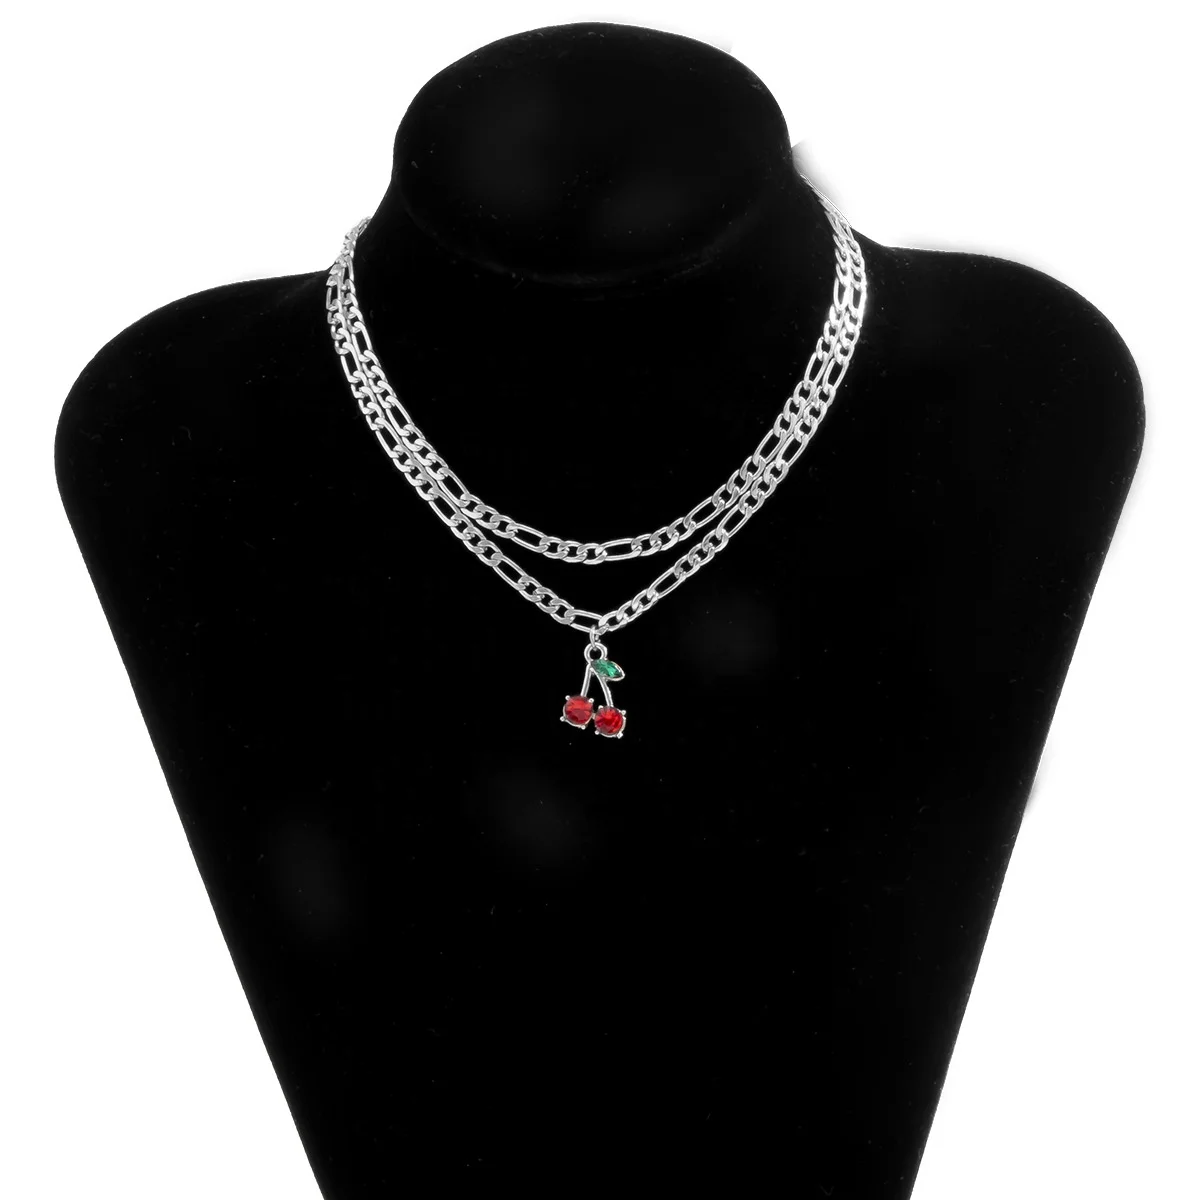 

Vintage Double Layer Crystal Cherry Pendant Necklace Women Punk Thick Chains Geometric Clavicle Necklace Gift Jewelry, Picture shows